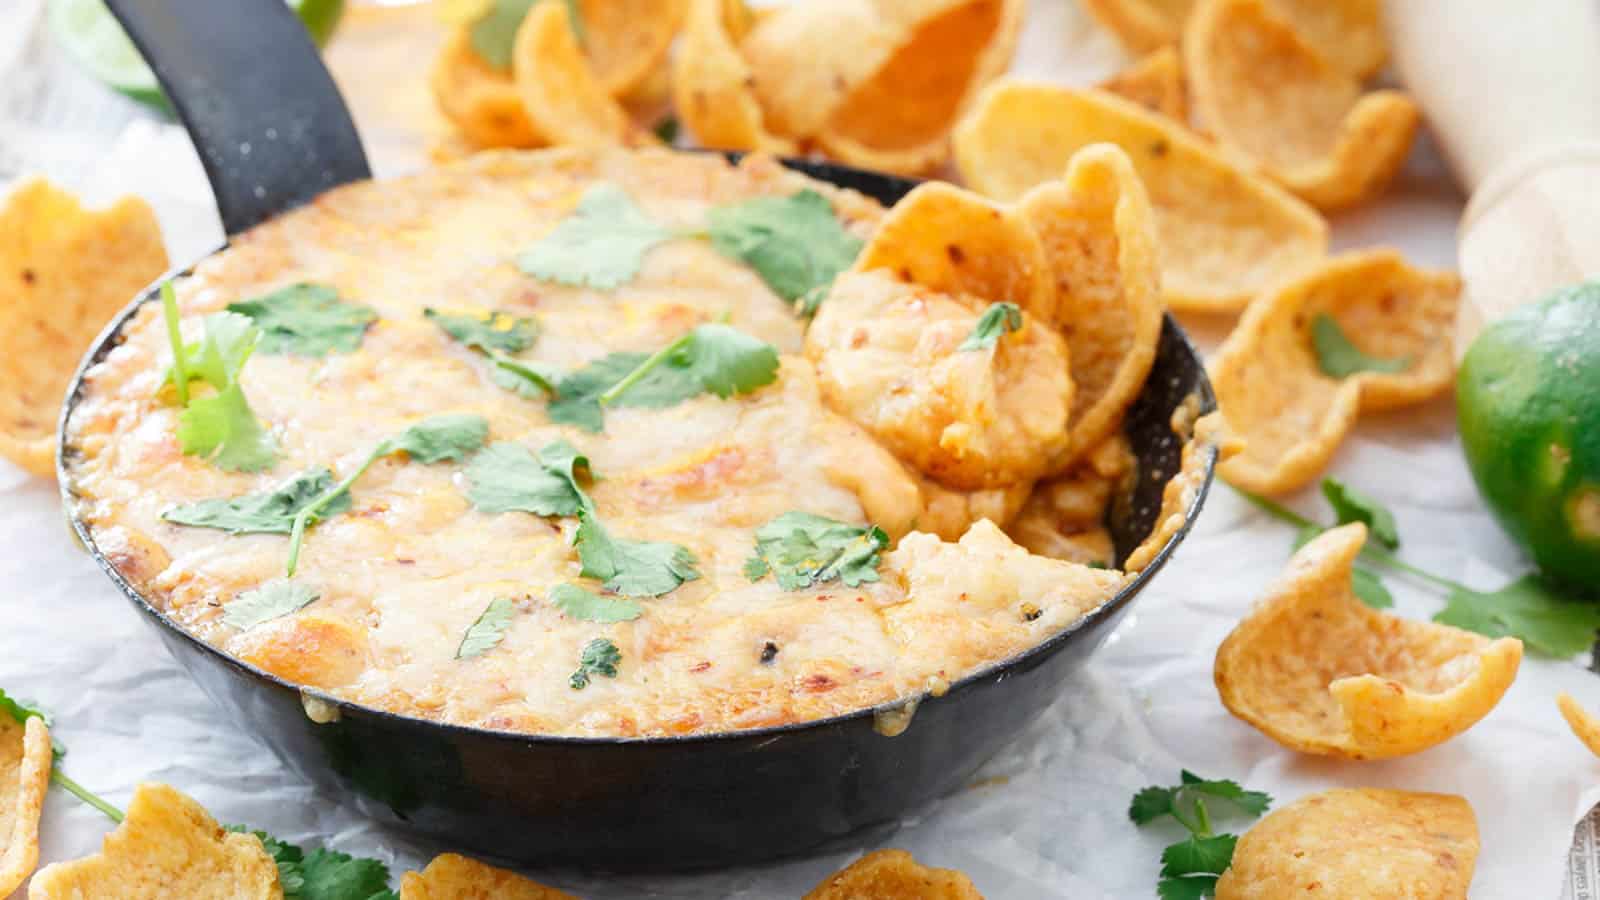 Fundido dip with chips.